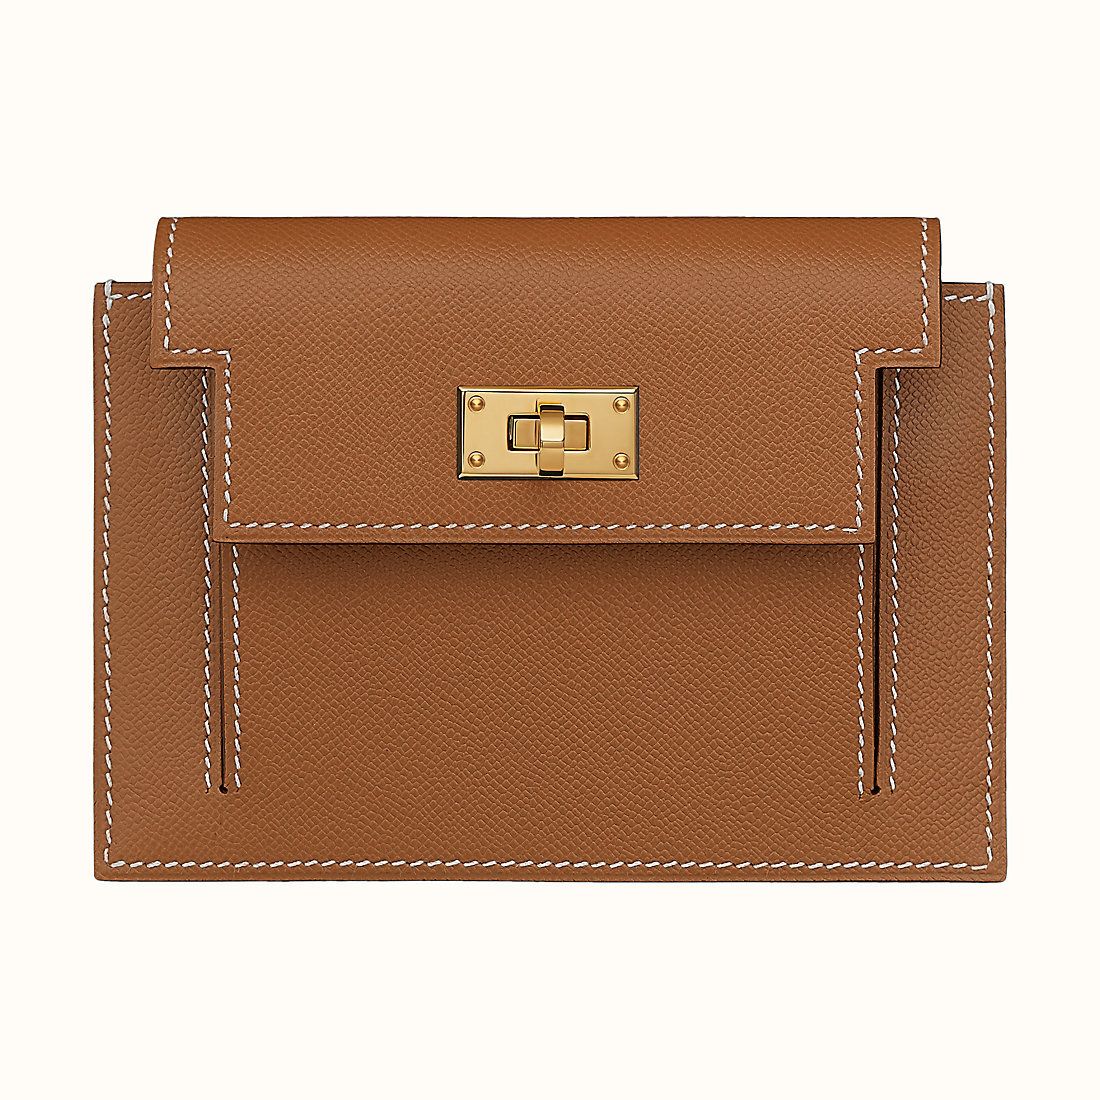 hermes kelly wallet review